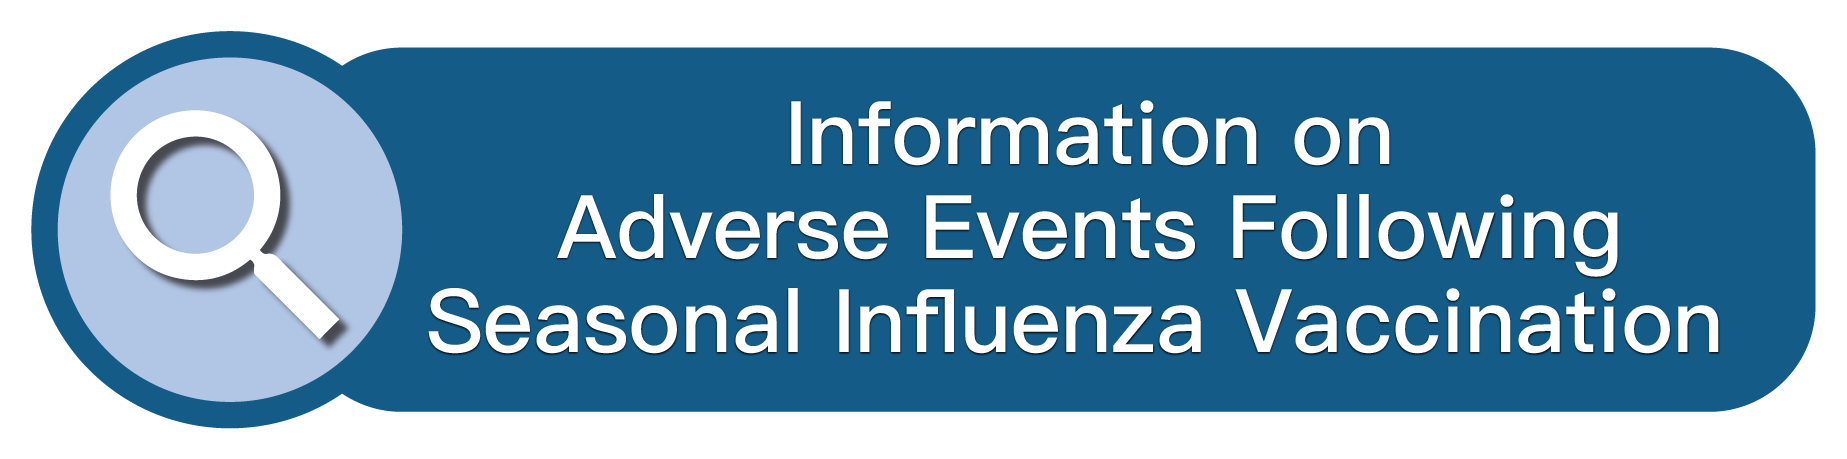 Information on Adverse Events Following Seasonal Influenza Vaccination